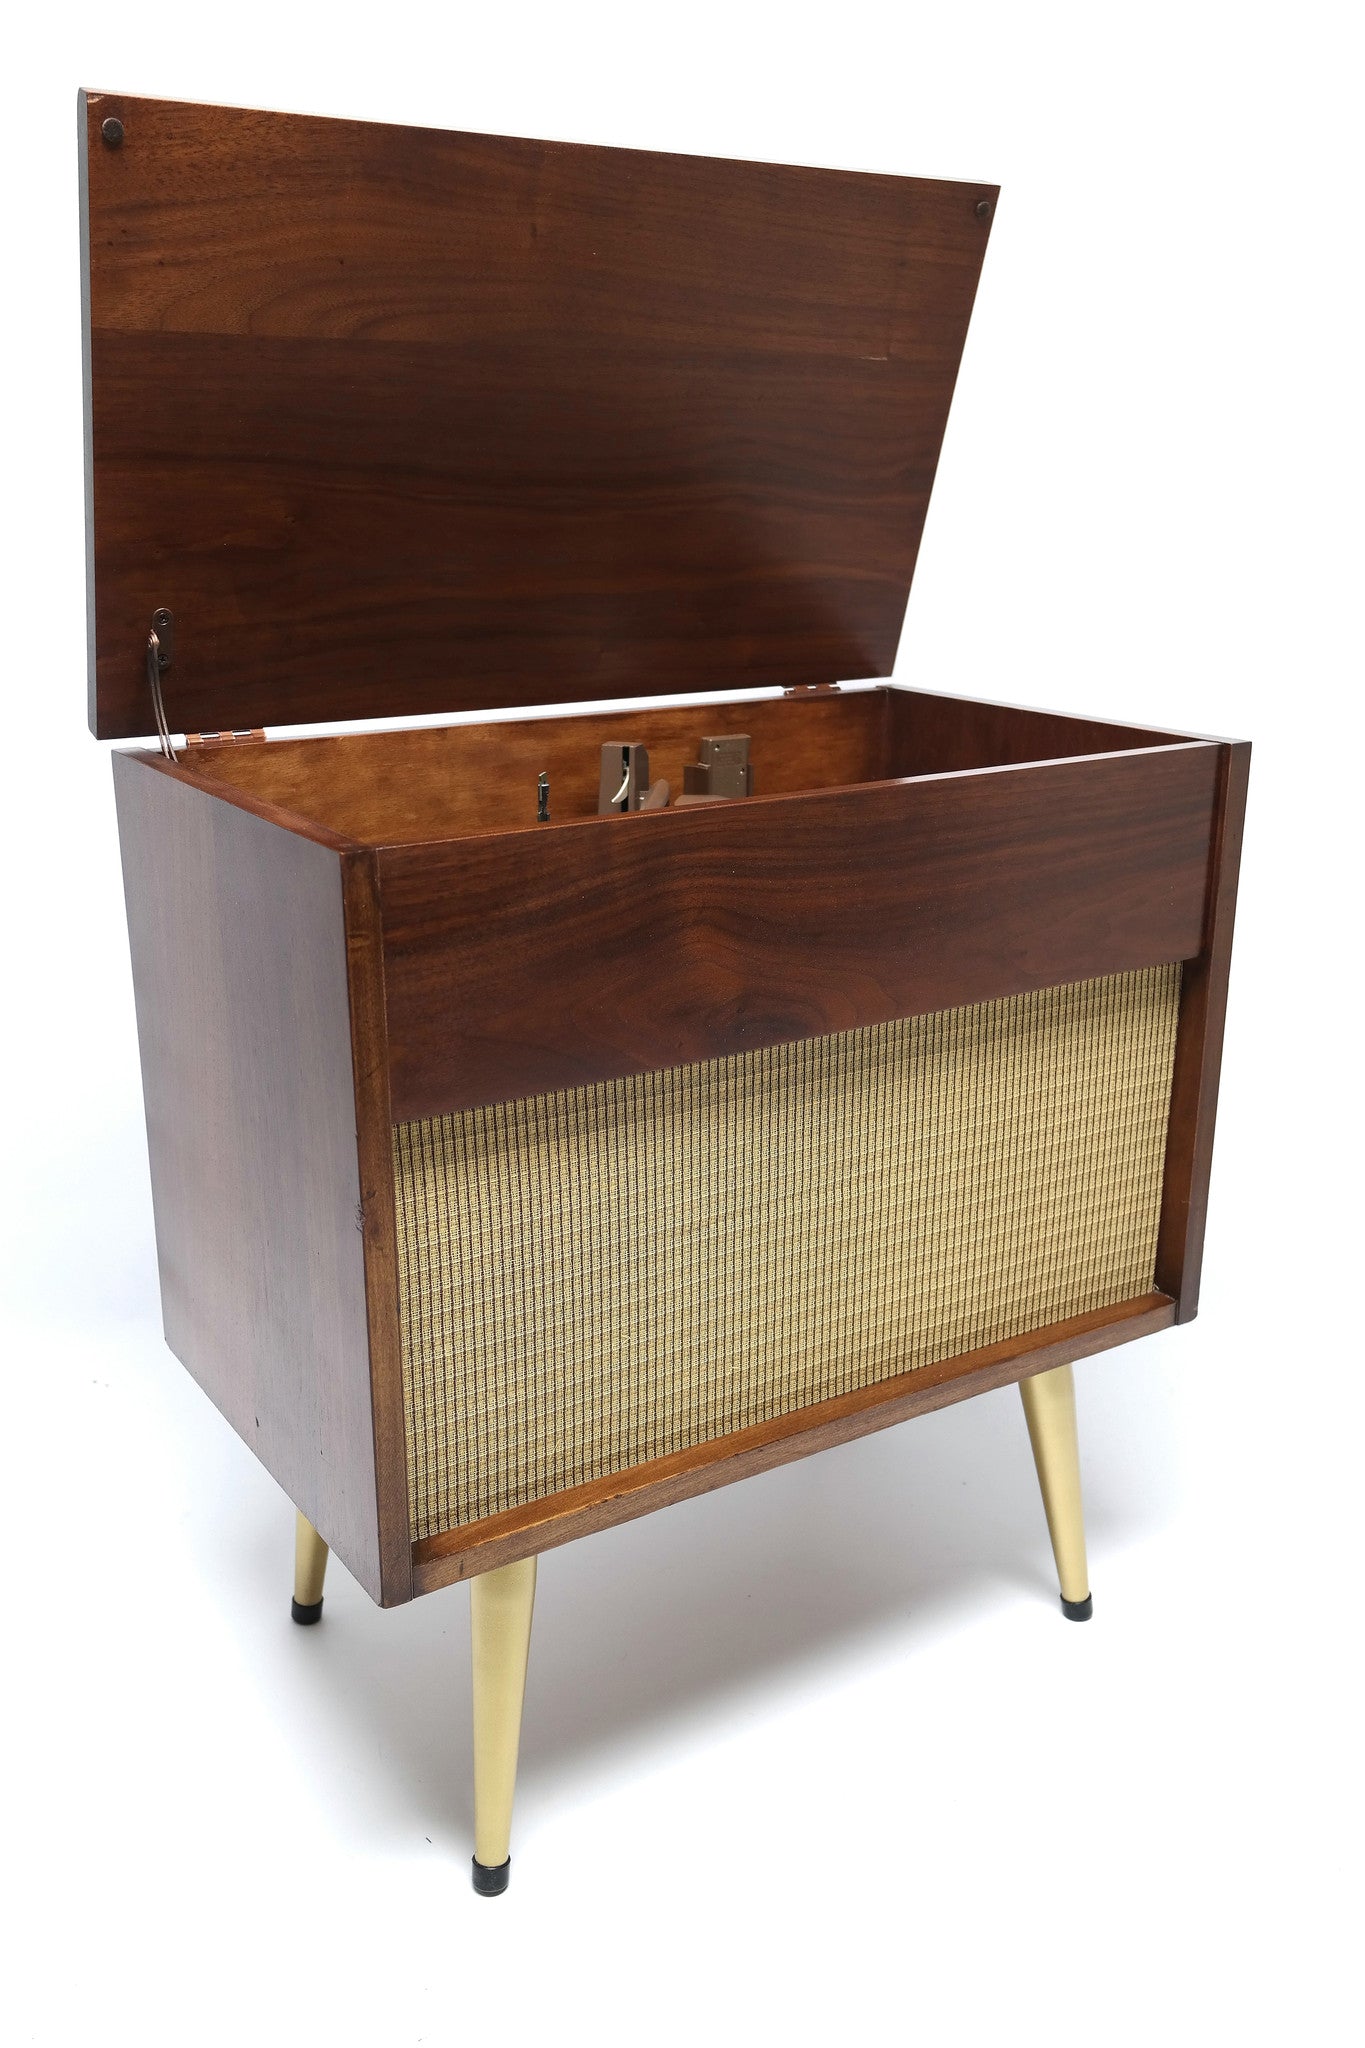 MCM  - ARVIN - Mid Century low Boy Consolette Record Player The Vintedge Co.